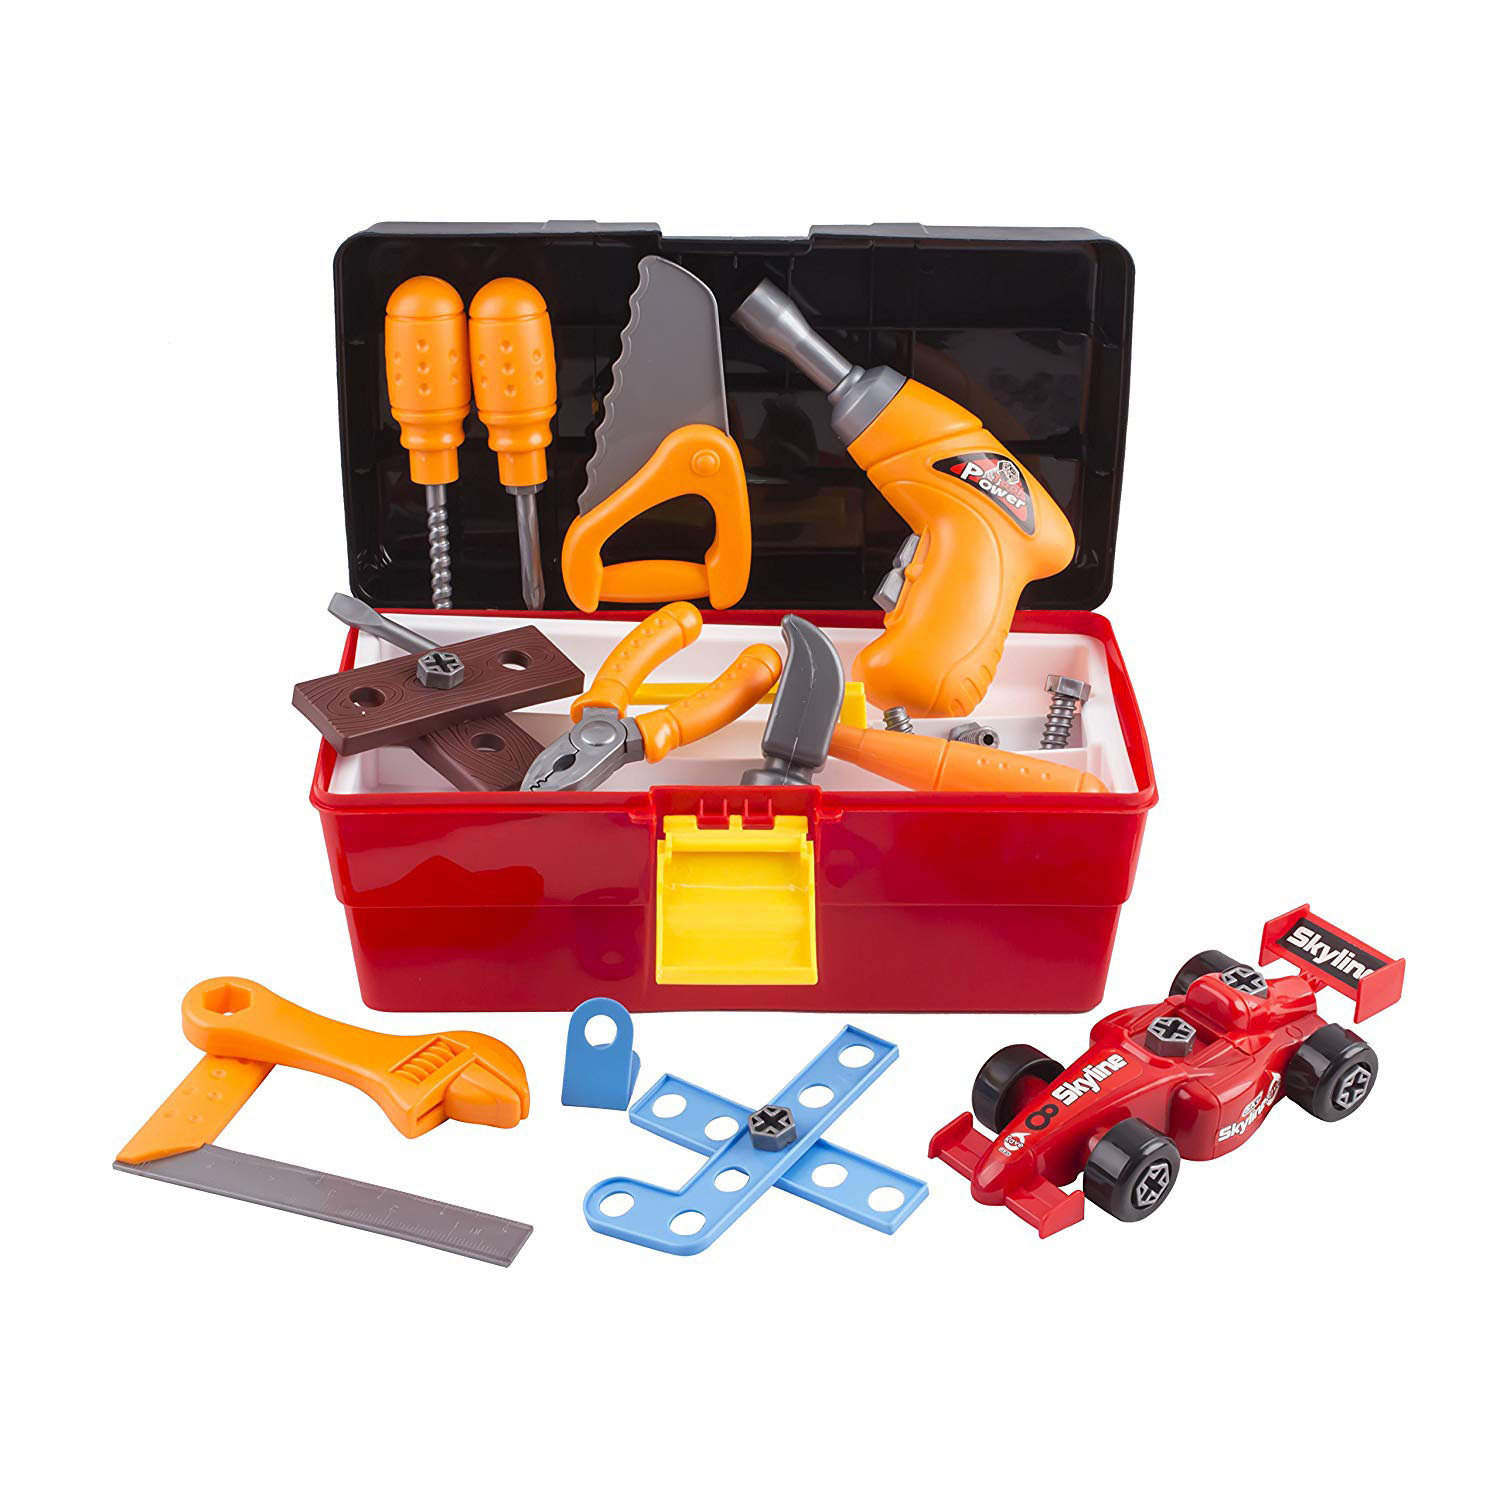 44 Piece Toy Tool Set With Construction Kit Accessories Portable Realistic Tools Box Including Electric Drill Hammer Wrench Screwdriver F1 Car Perfect For Boys Children’s Educational STEM Pretend Play 661-318